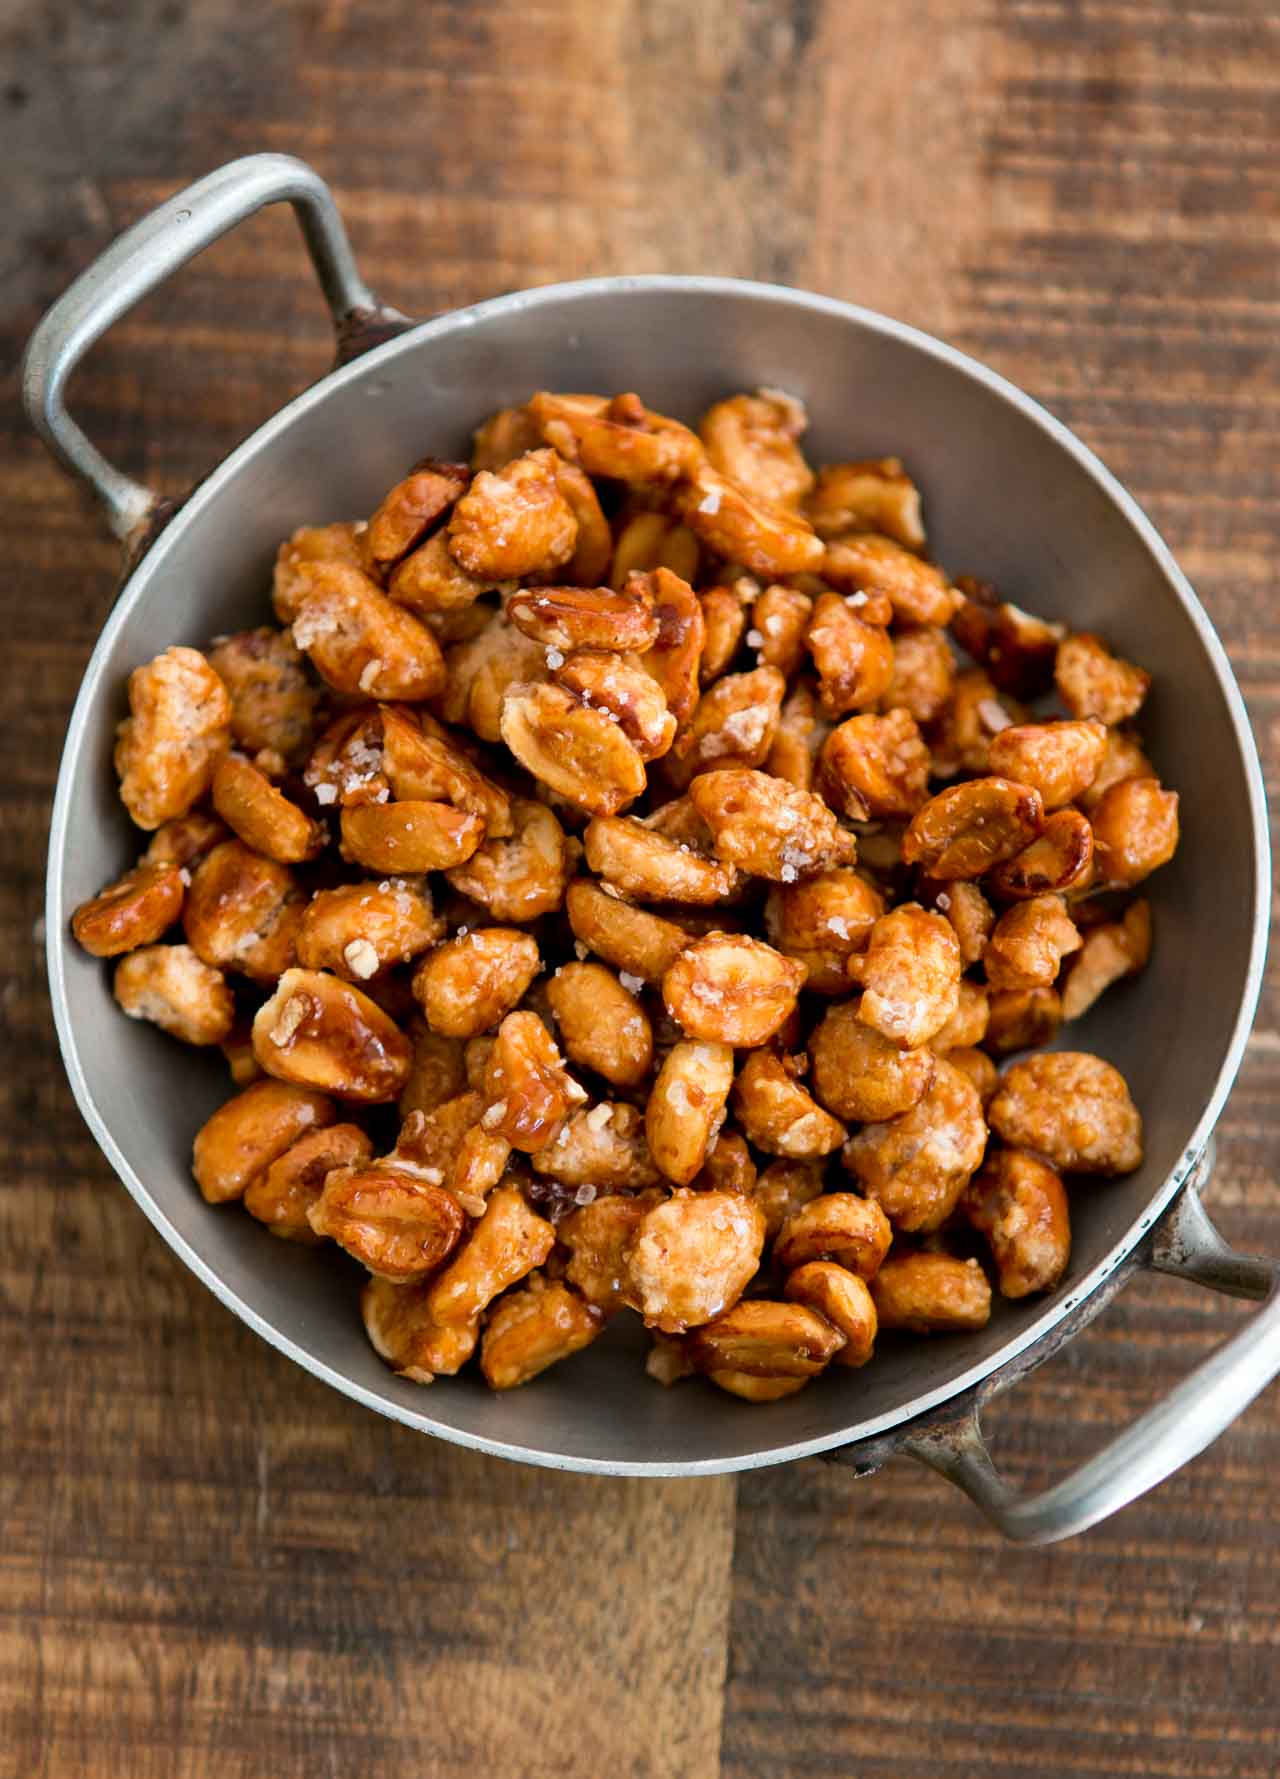 Candied Peanuts